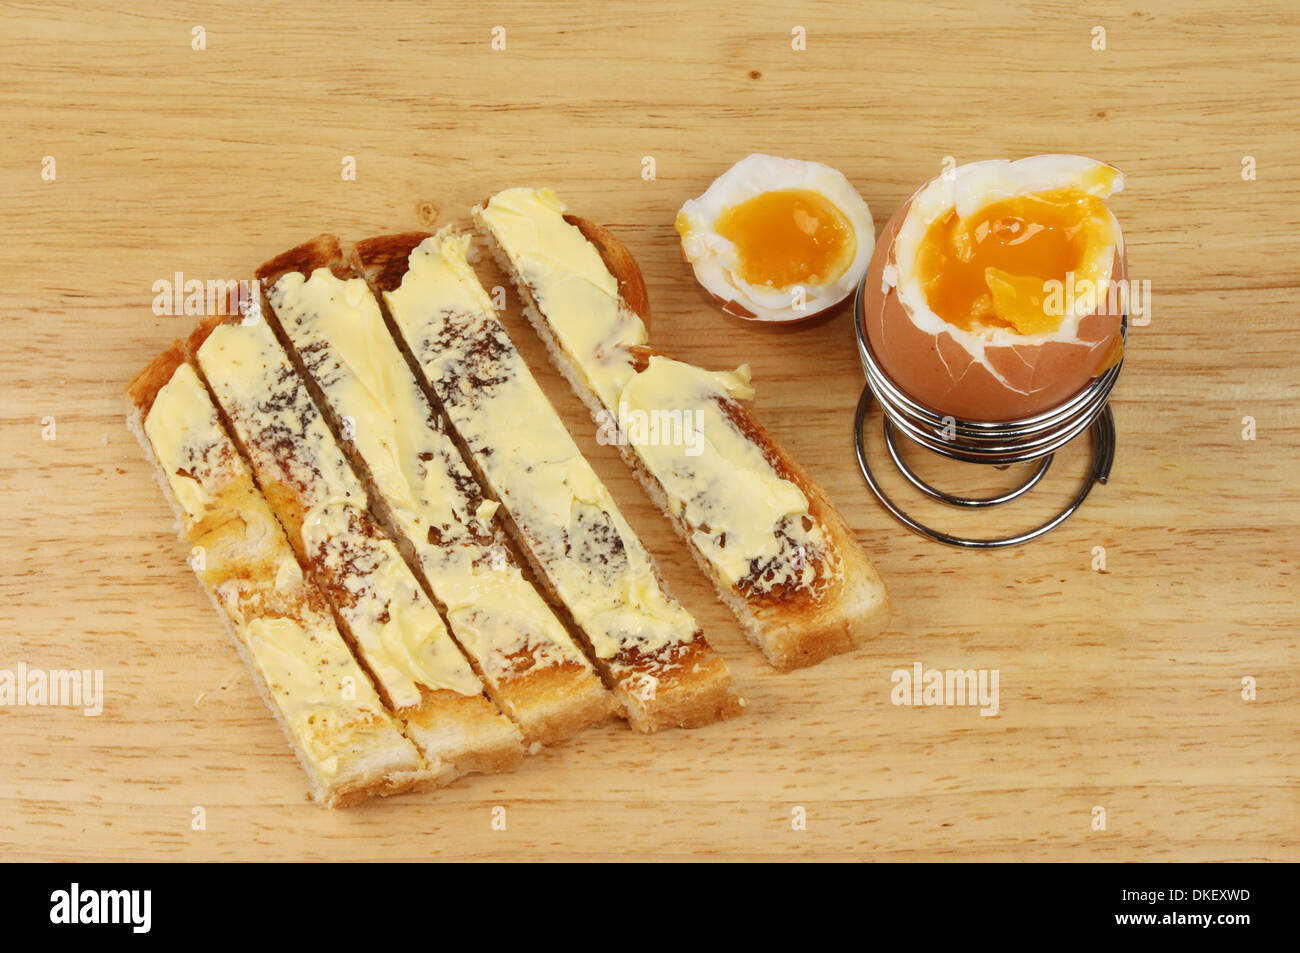 Soft boiled egg and toast soldiers on a wooden board Stock Photo